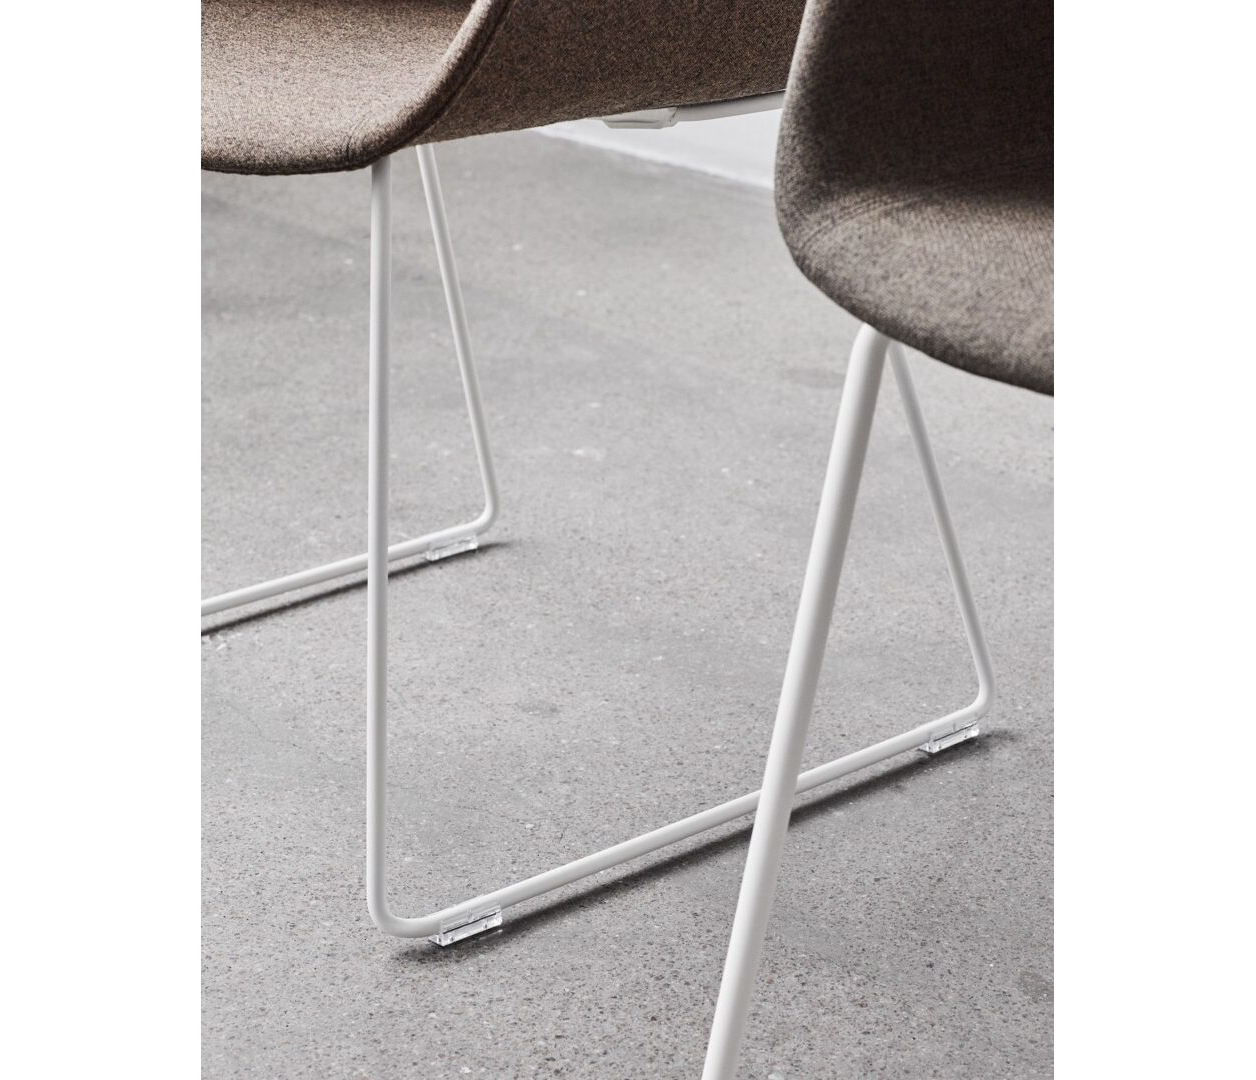 OCEE&FOUR – Chairs – FourMe 88 – Details Image 1 Large